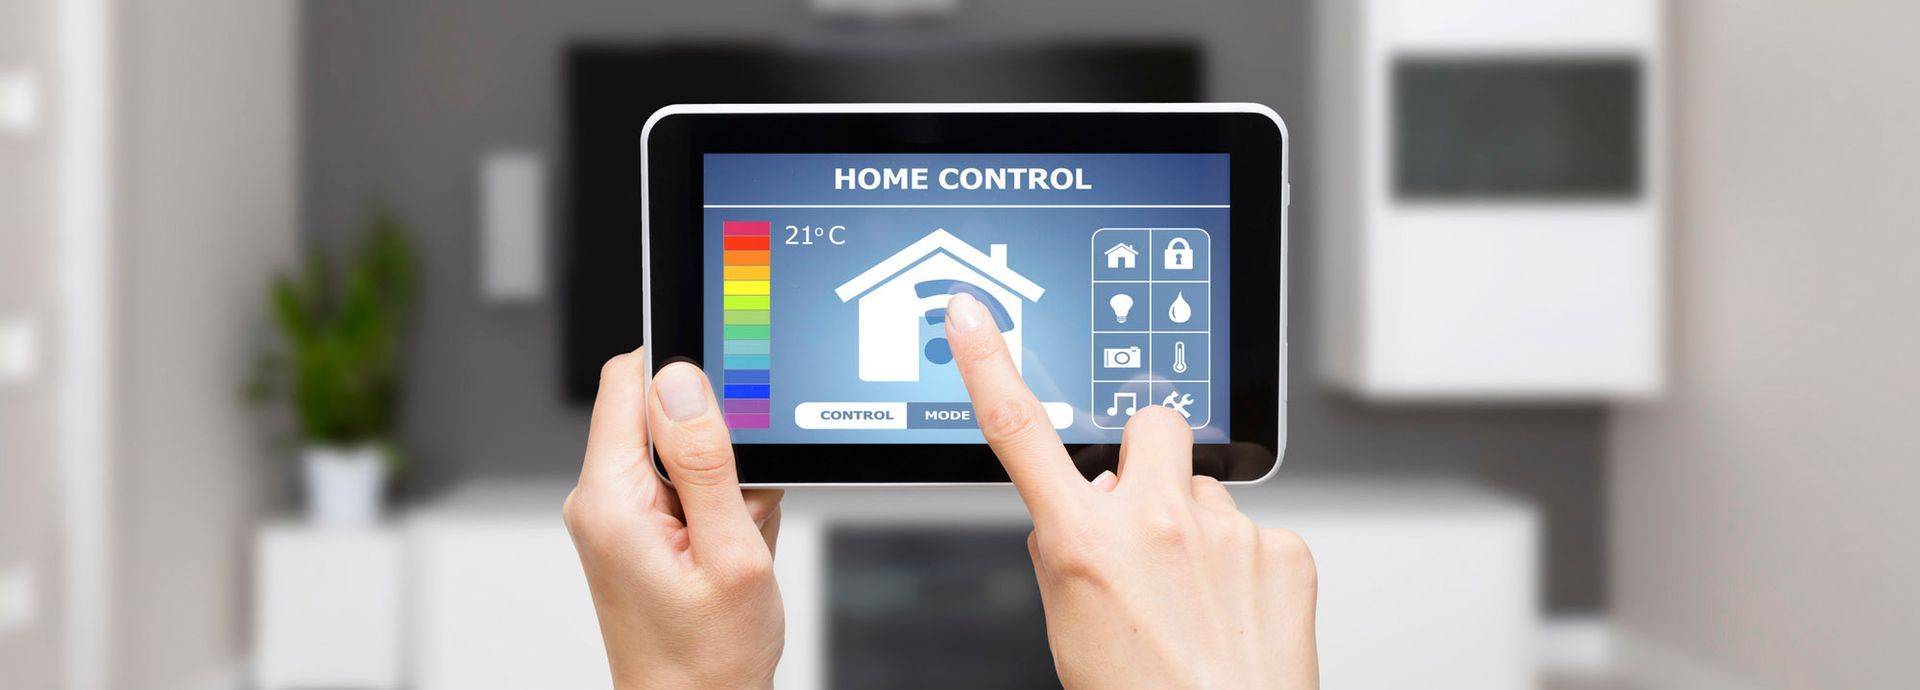 A person is holding a tablet with a home hvac control app on it.